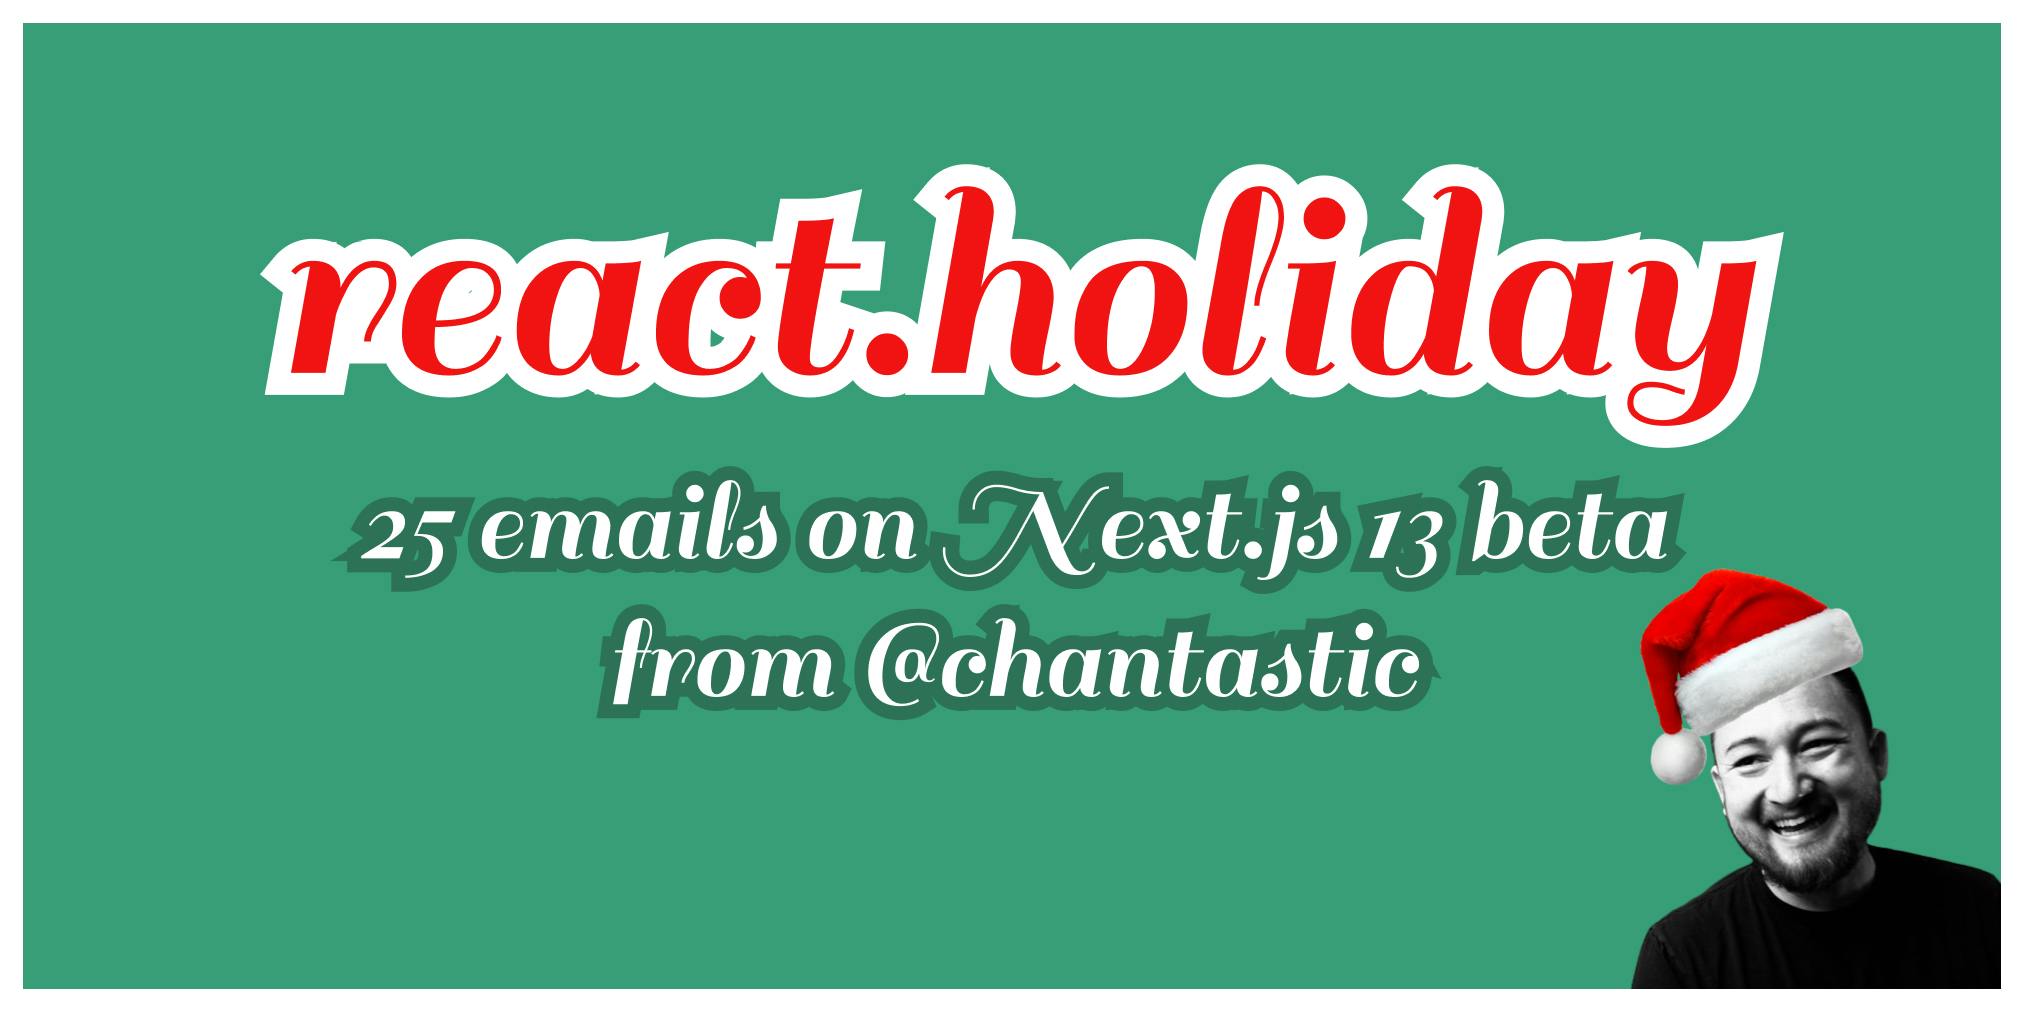 react.holiday, 25 emails on Next.js 13 beta from @chantastic